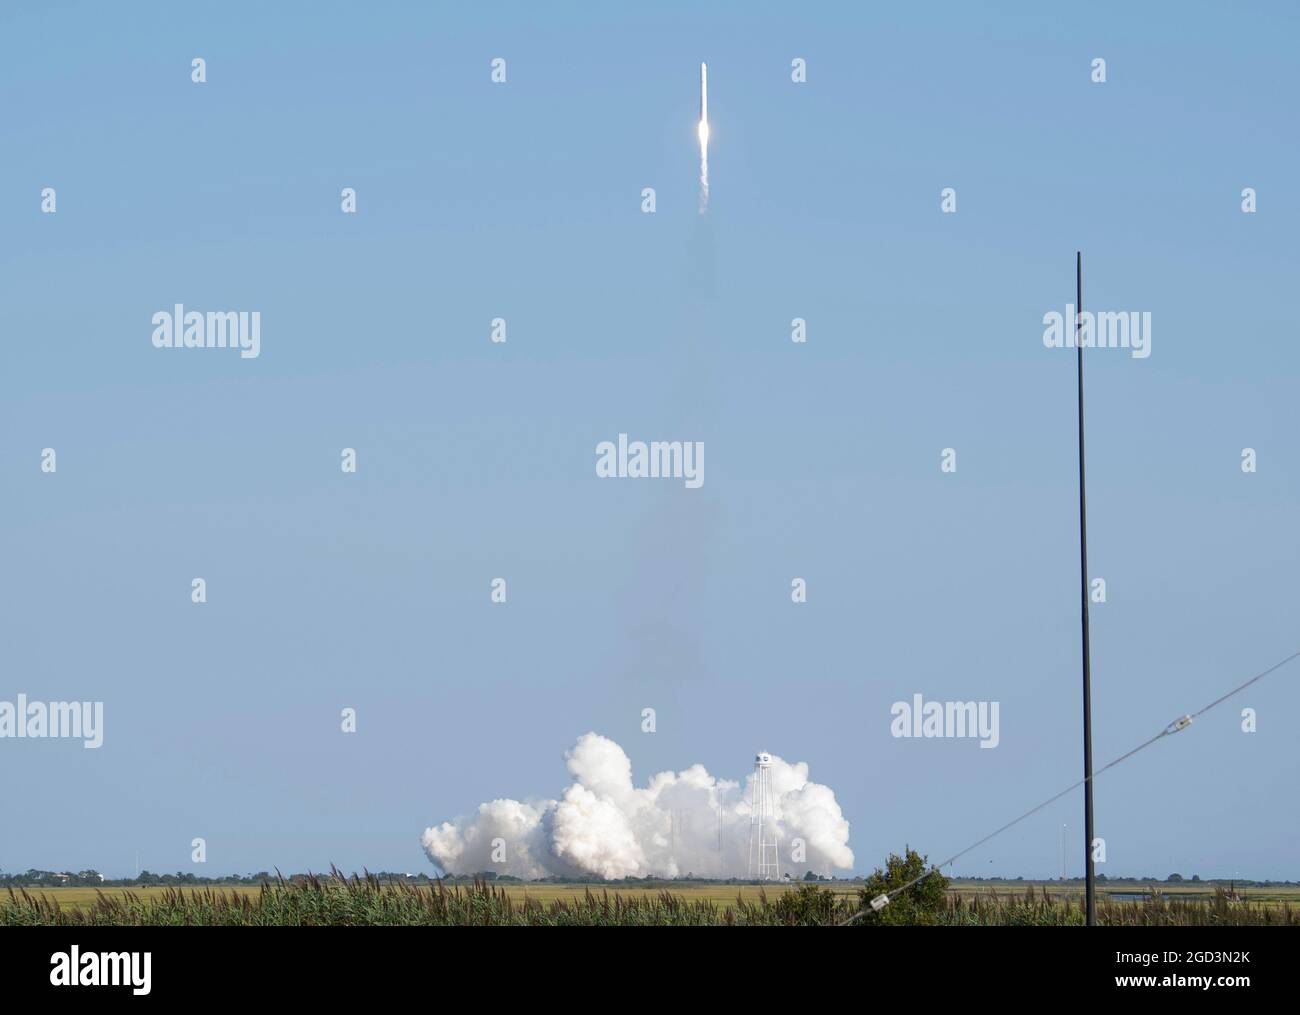 Atlantic Regional Spaceport, US,  Aug. 10, 2021, A Northrop Grumman Antares rocket carrying a Cygnus resupply spacecraft launches from Pad-0A of the Mid-Atlantic Regional Spaceport, Tuesday, Aug. 10, 2021, at NASA's Wallops Flight Facility in Virginia. Northrop Grummans 16th contracted cargo resupply mission with NASA will deliver nearly 8,200 pounds of science and research, crew supplies and vehicle hardware to the International Space Station and its crew. Mandatory Credit: Joel Kowsky/NASA via CNP Stock Photo